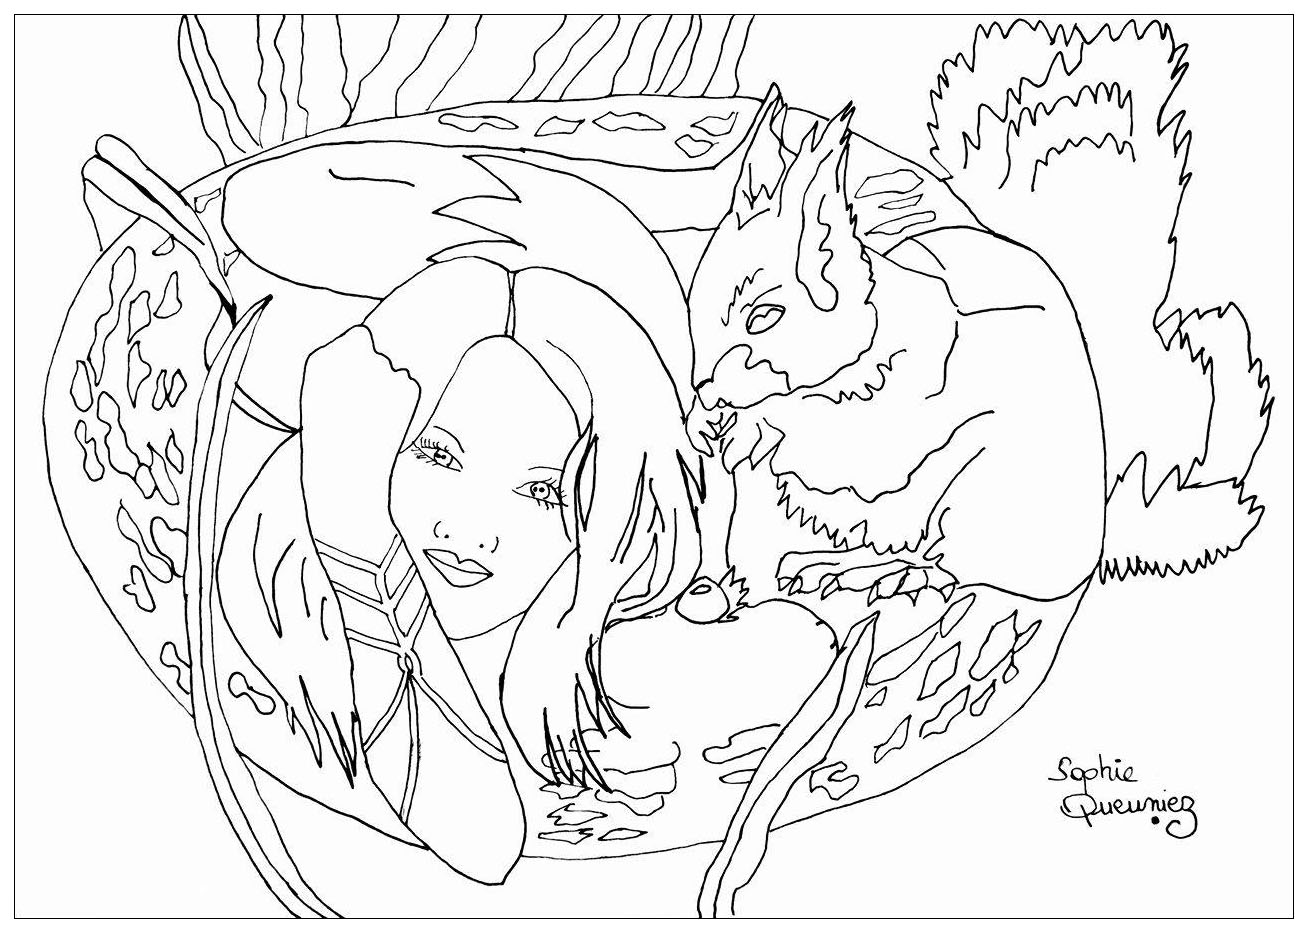 Coloring adult woman with squirrel